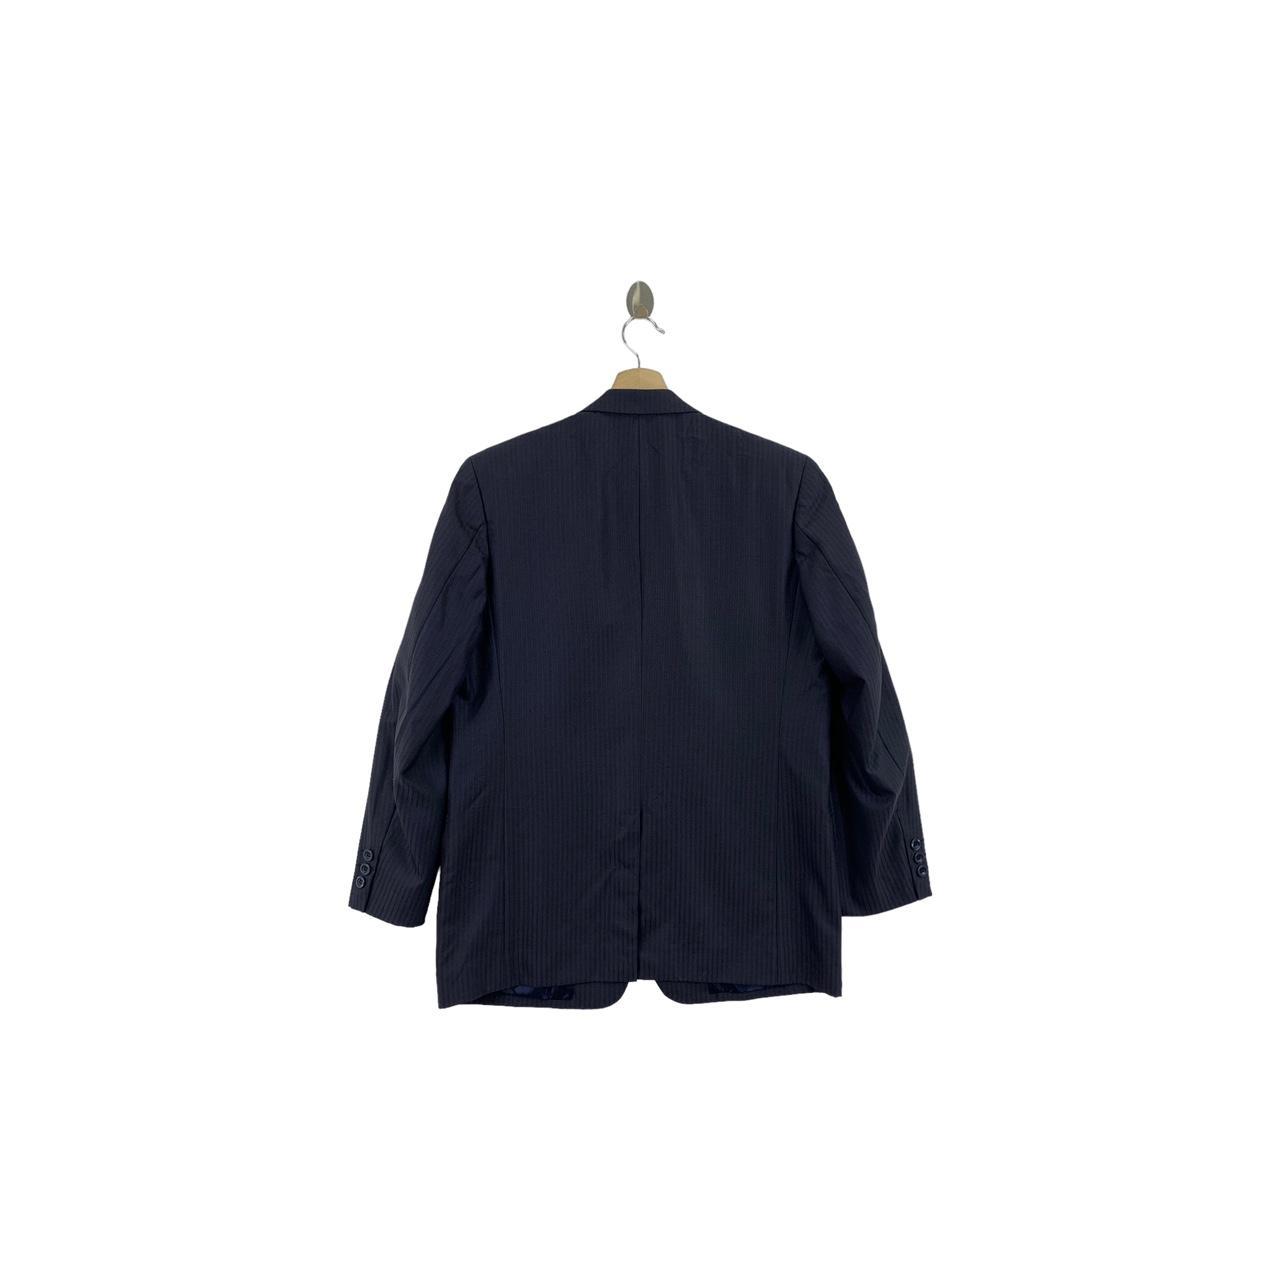 Dunhill Men's Navy Tailored-jackets (2)